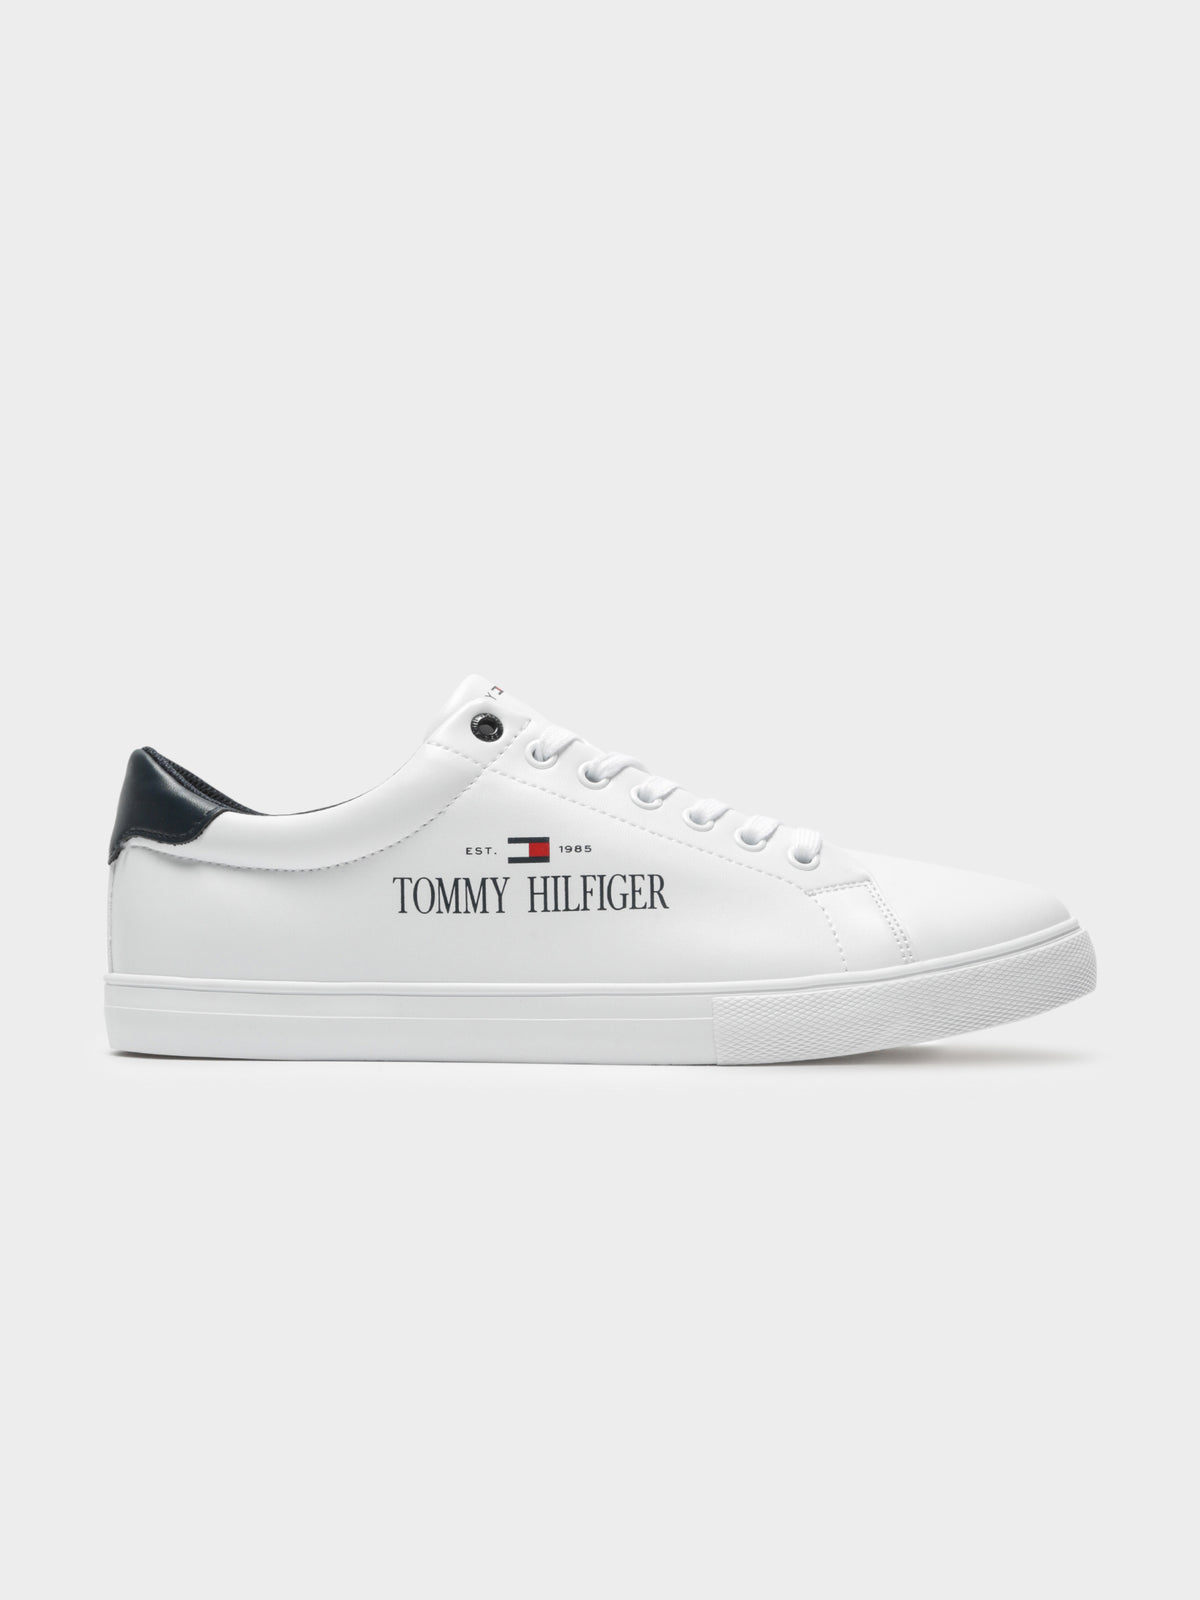 Corporate Sneakers in White